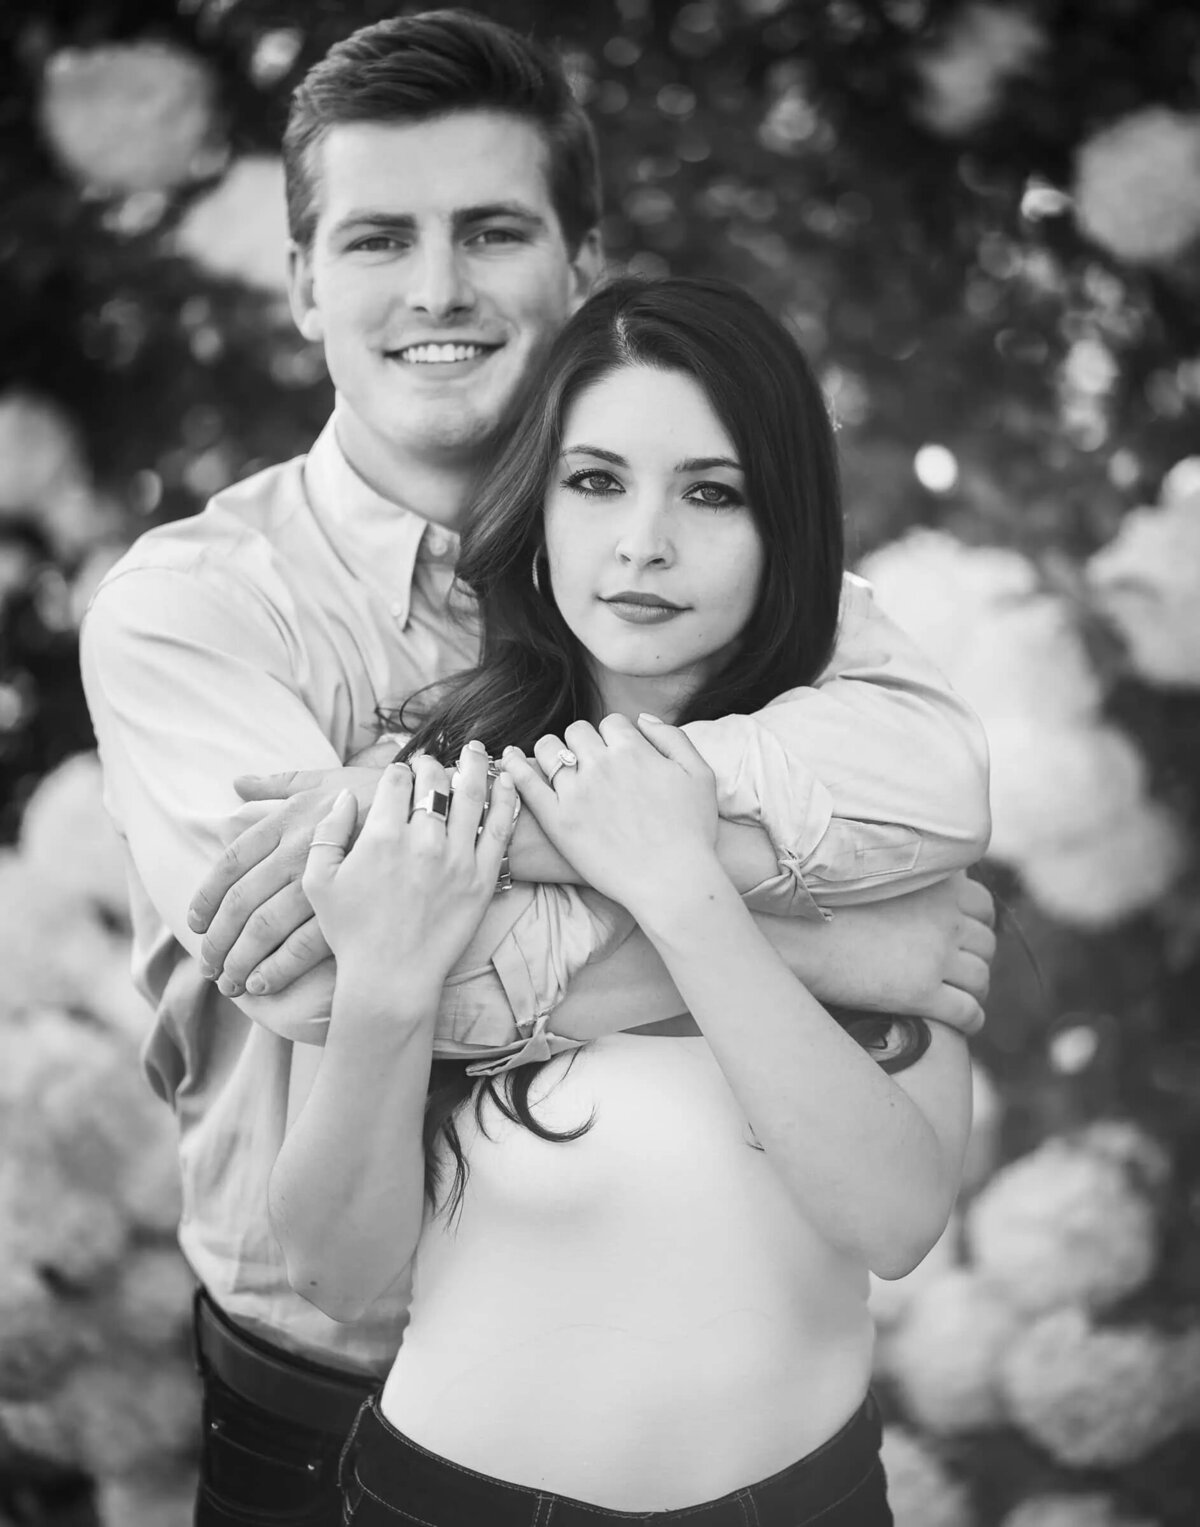 Black and white image of a smiling couple embracing, with the woman's hands on the man's chest and a backdrop of blooming flowers